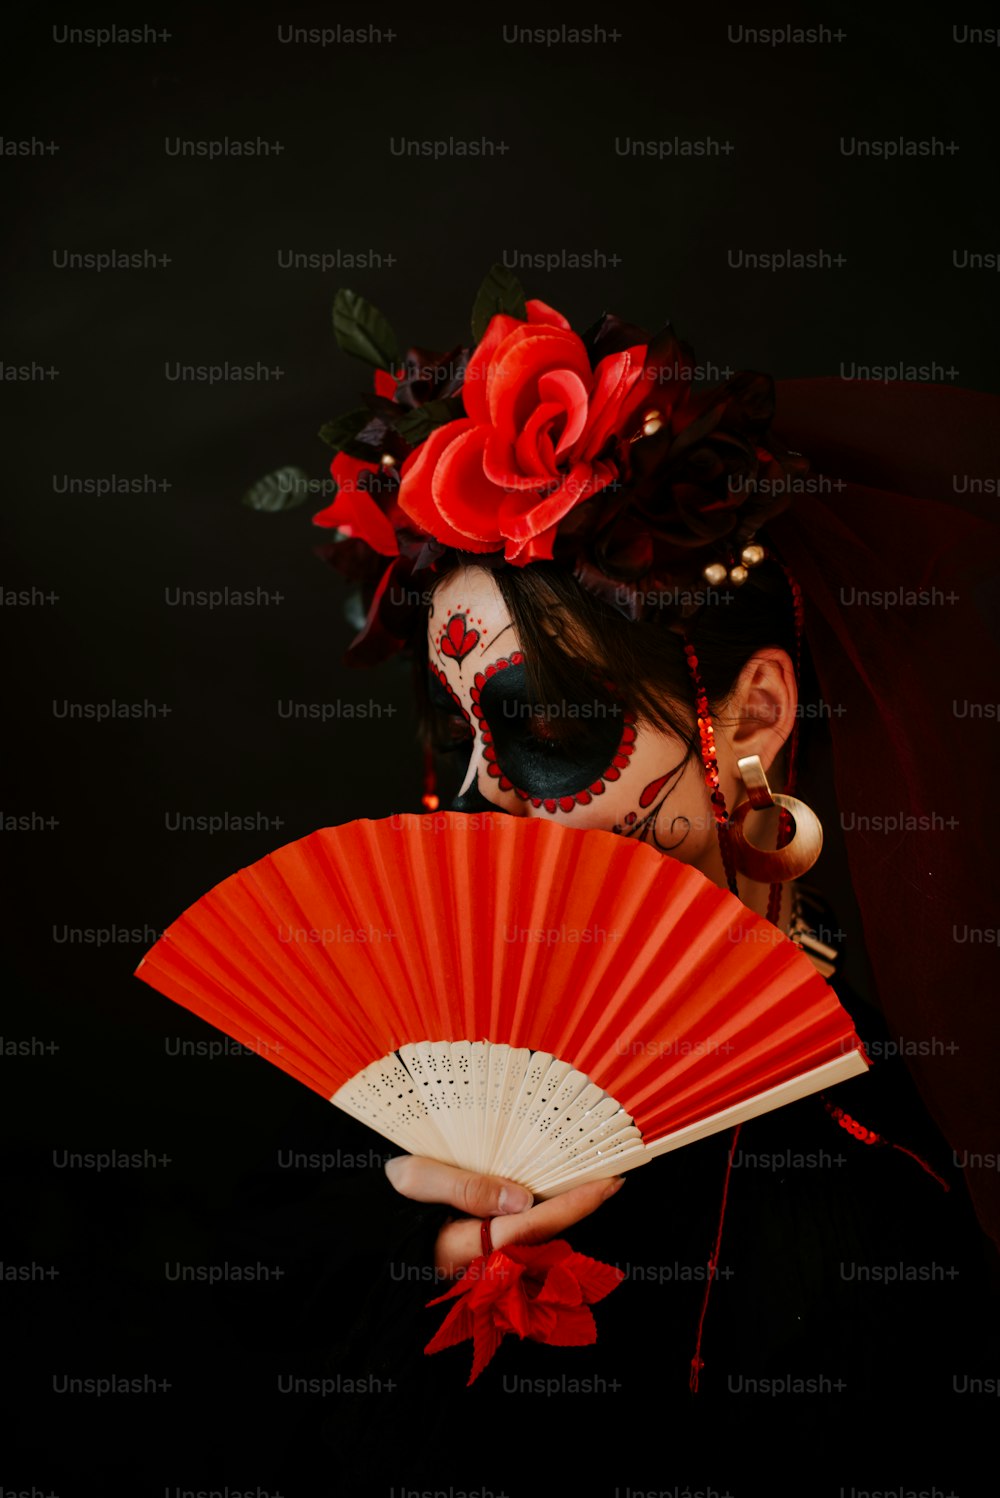 a woman with a red flower in her hair holding a red fan